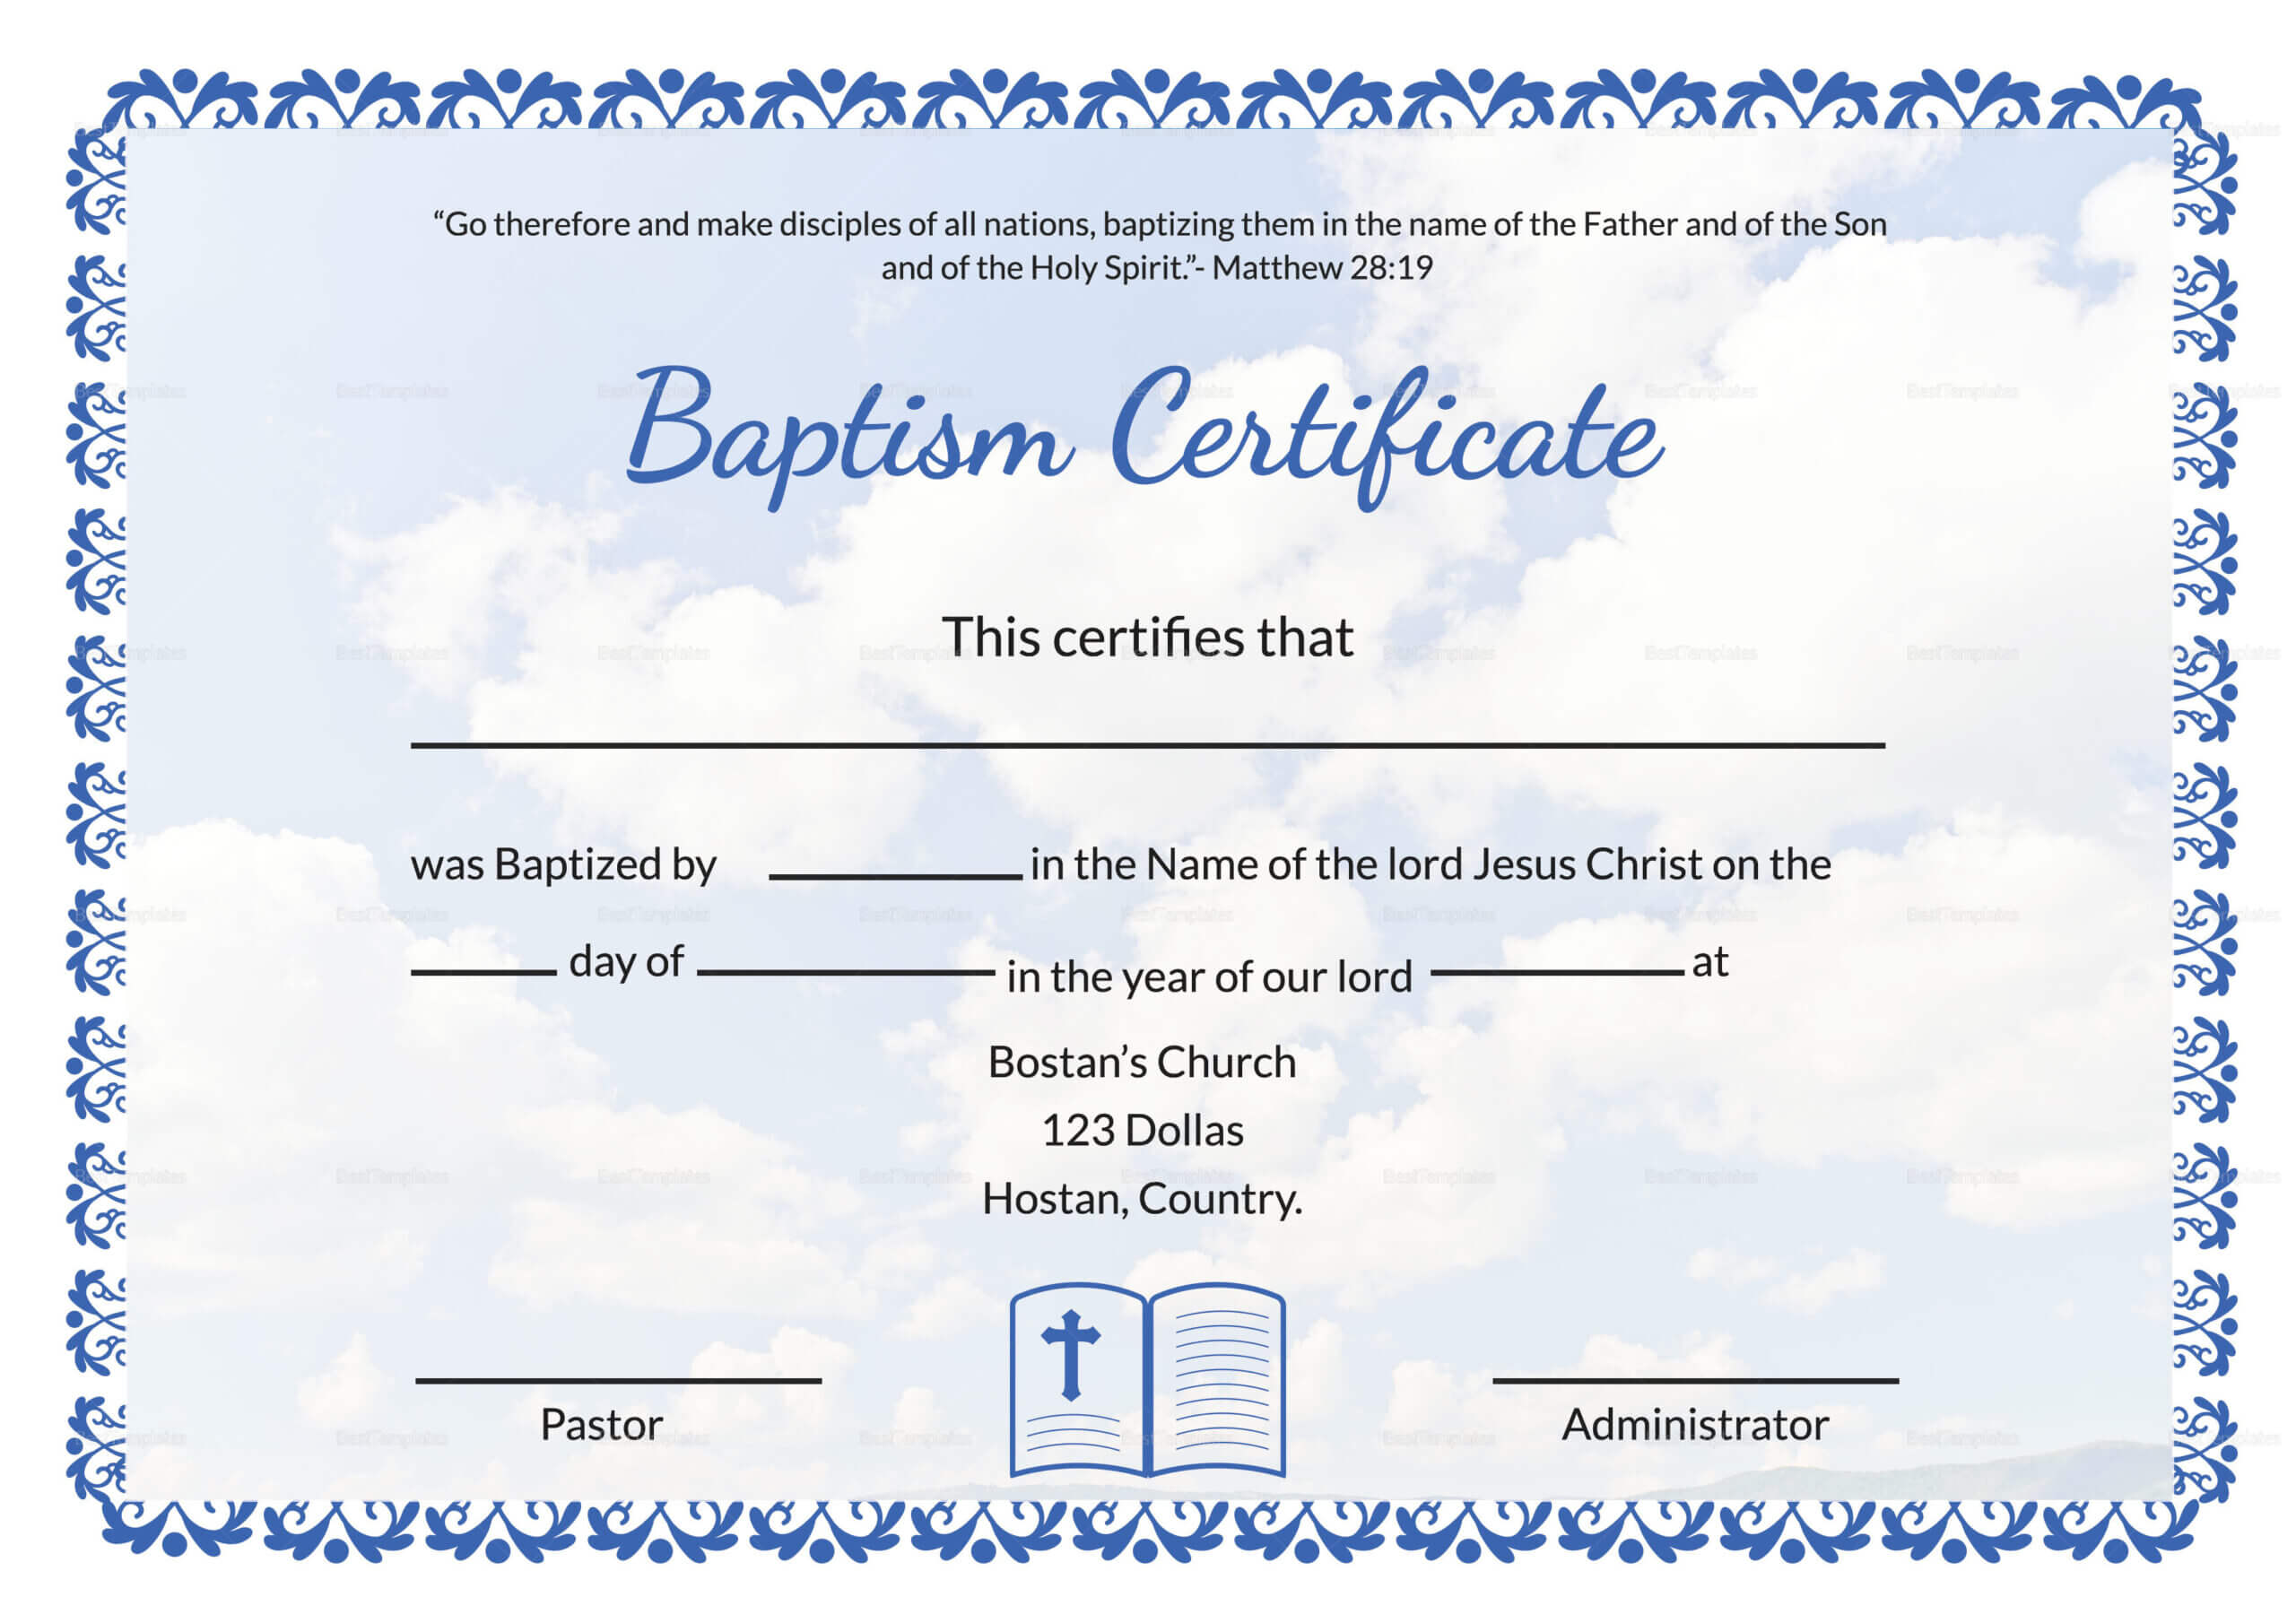 007 Certificate Of Baptism Template Ideas Unique Broadman Within Christian Certificate Template